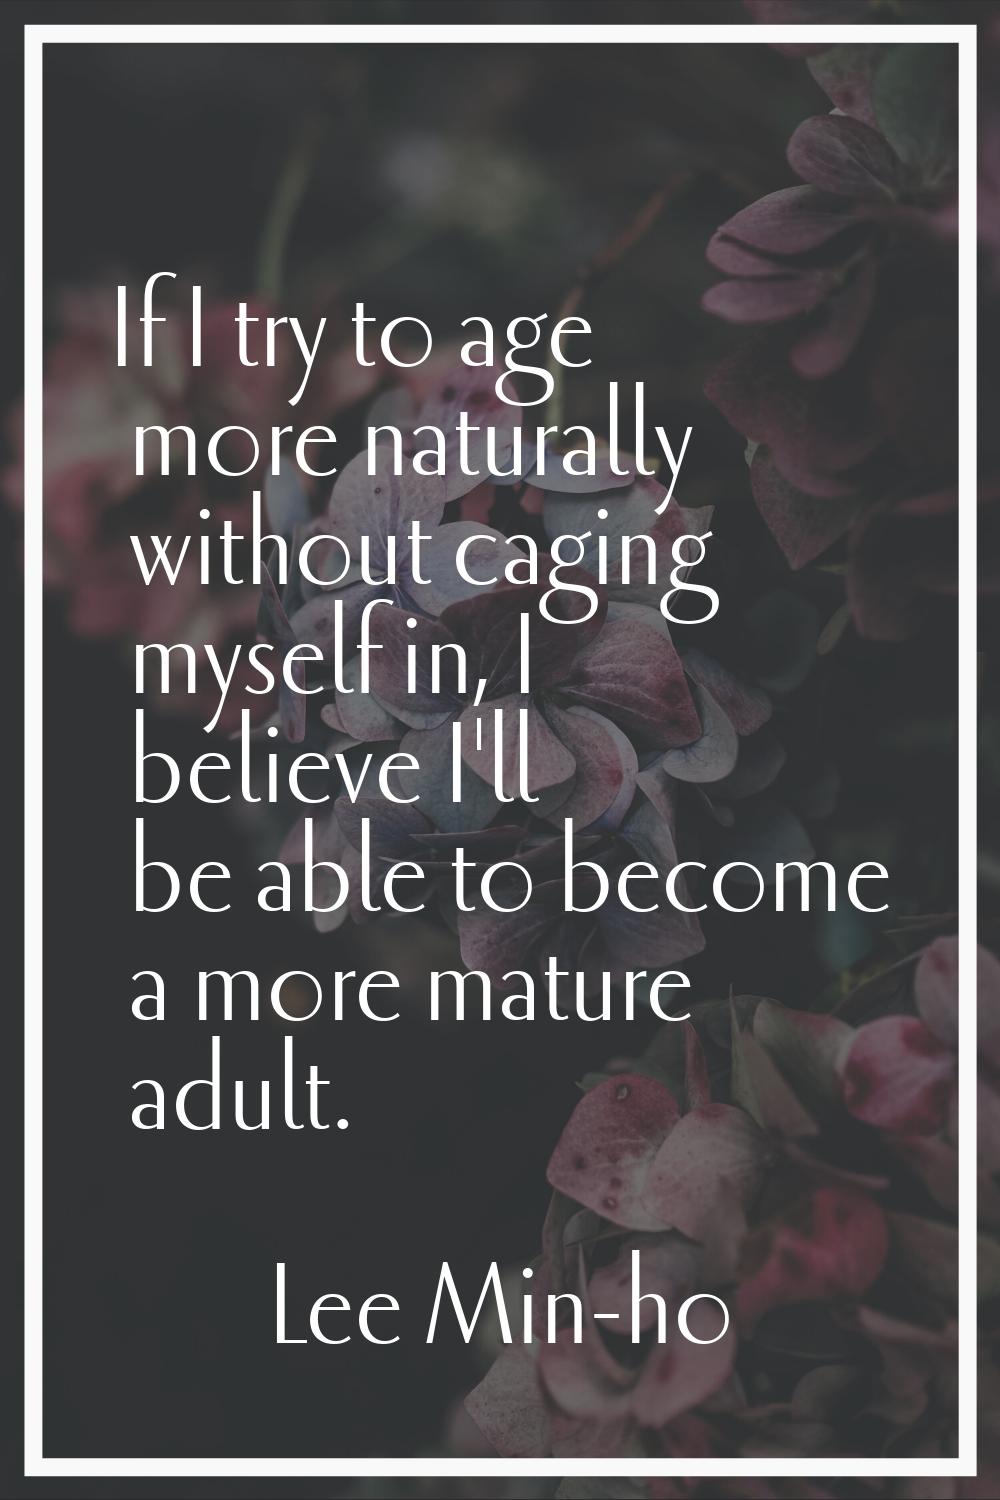 If I try to age more naturally without caging myself in, I believe I'll be able to become a more ma